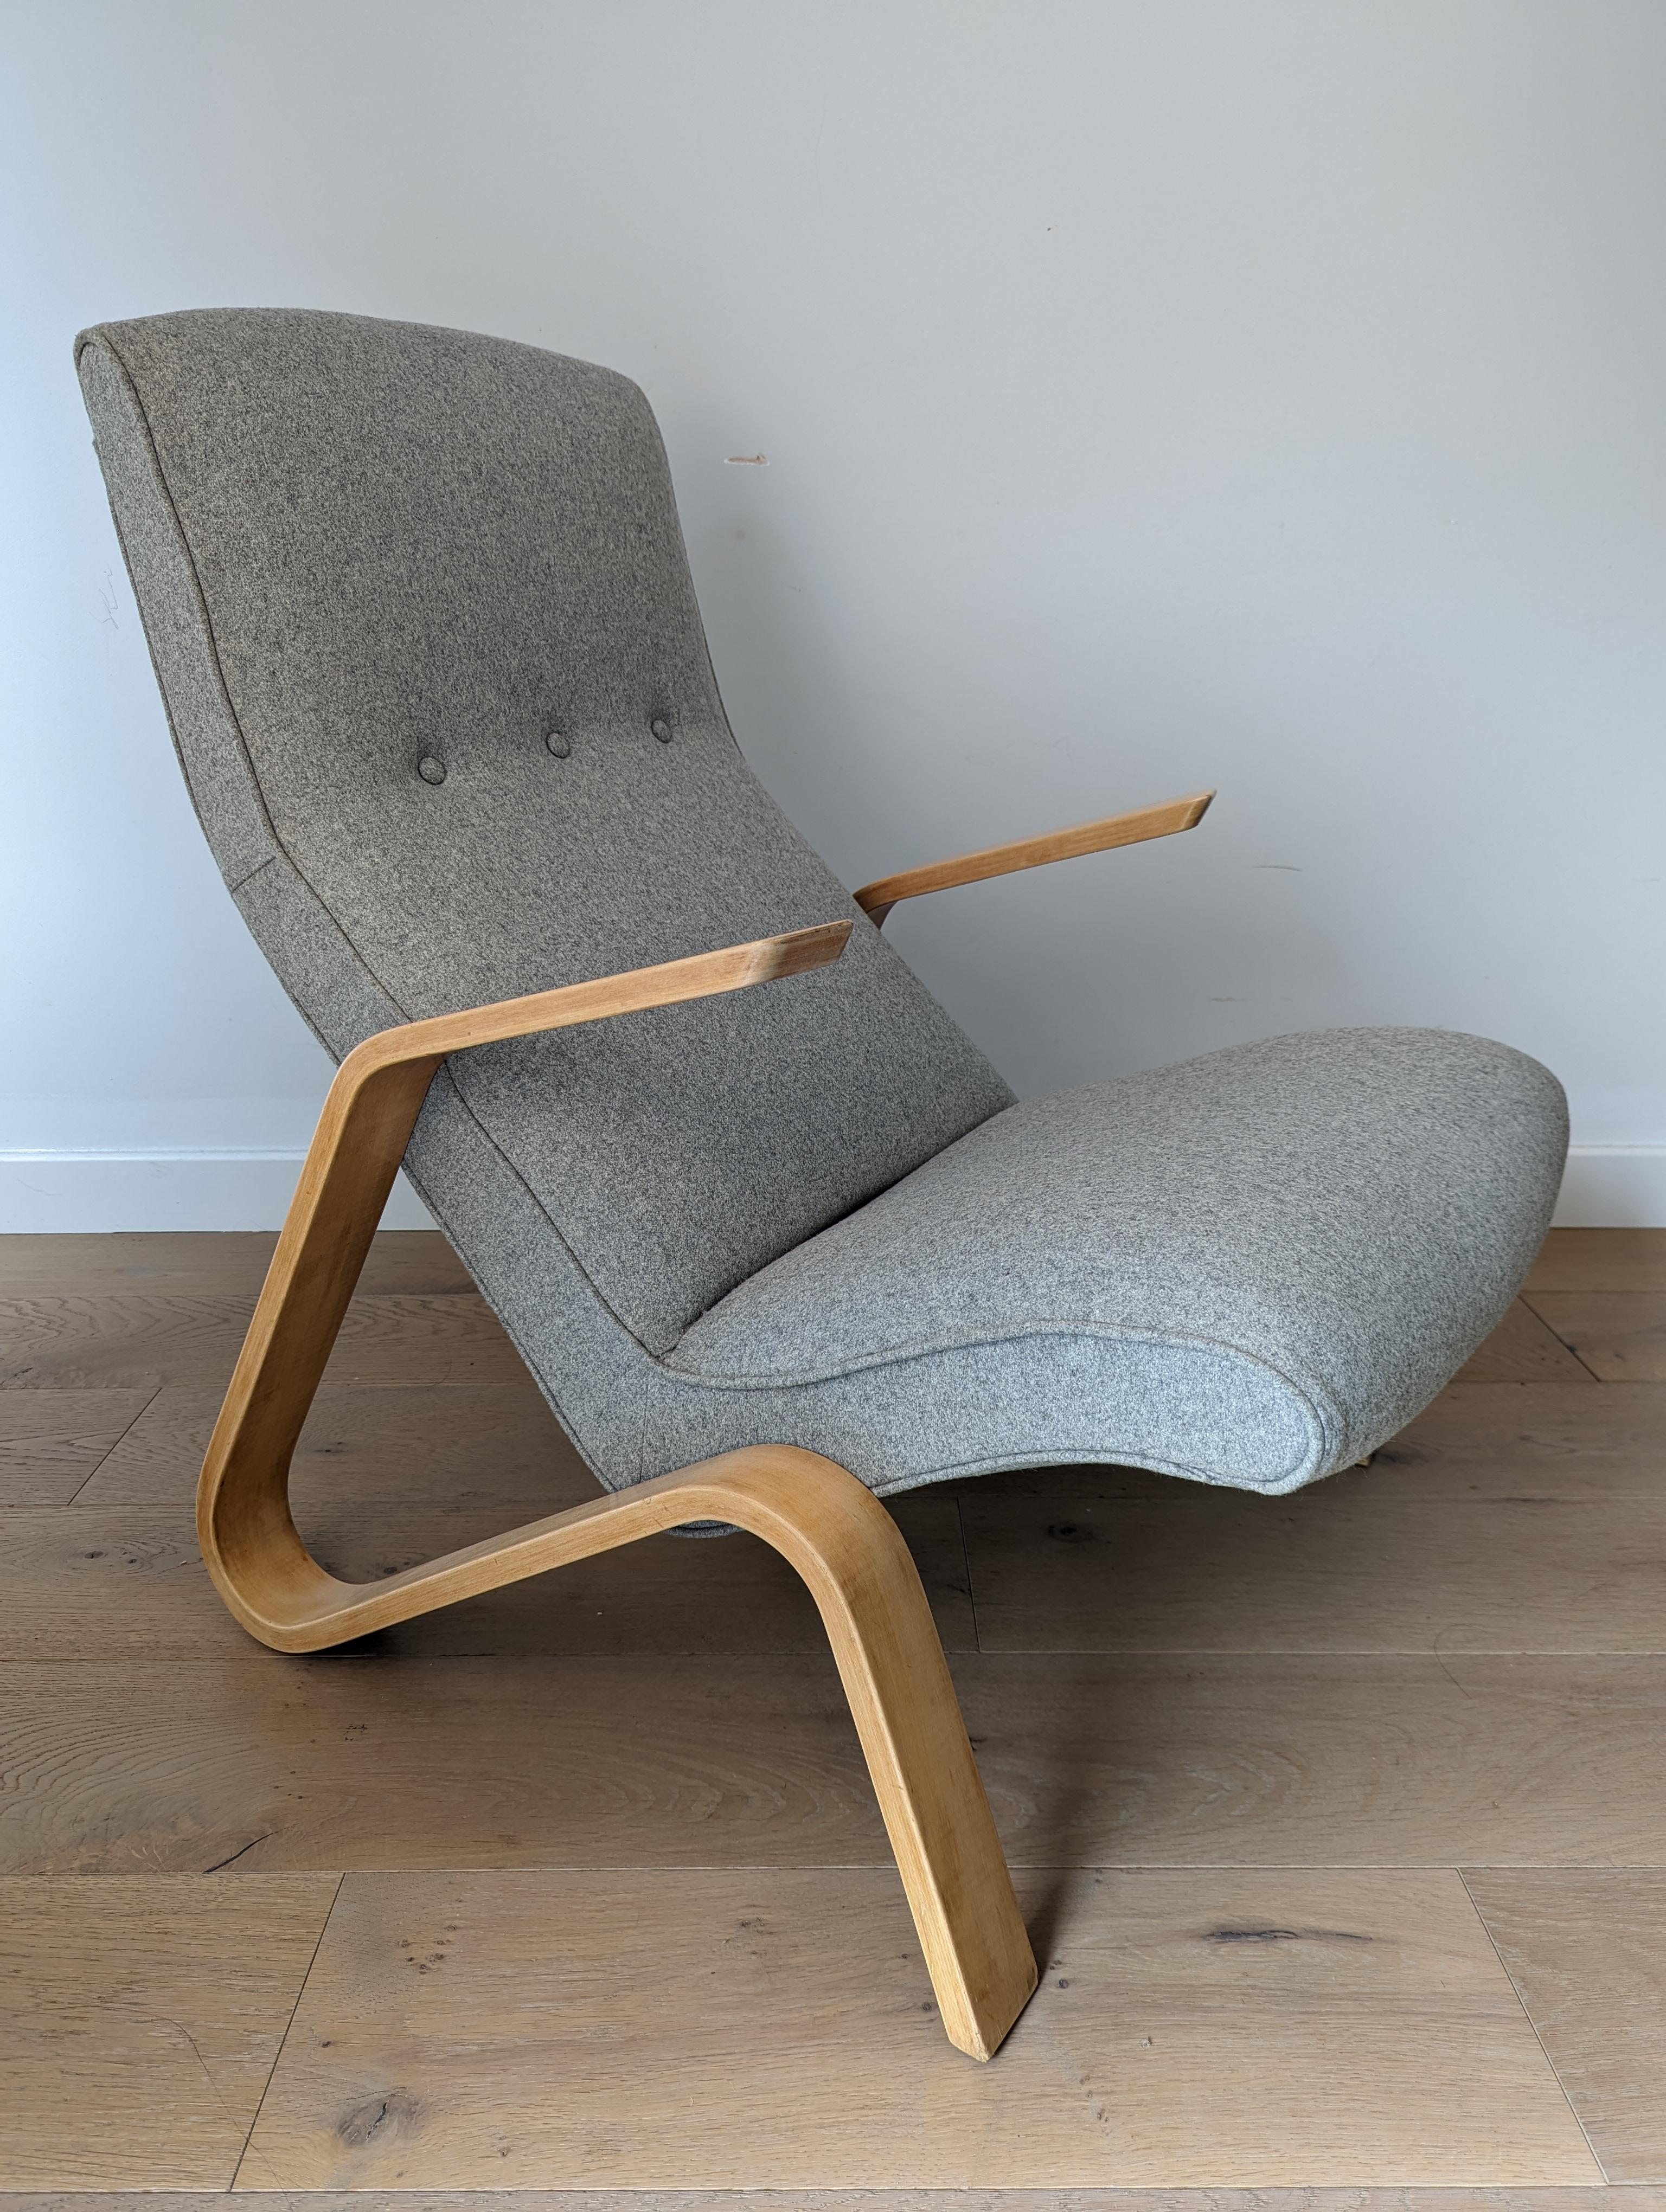 Mid-century Grasshopper chair by Eero Saarinen for Knoll (1950s) For Sale 1